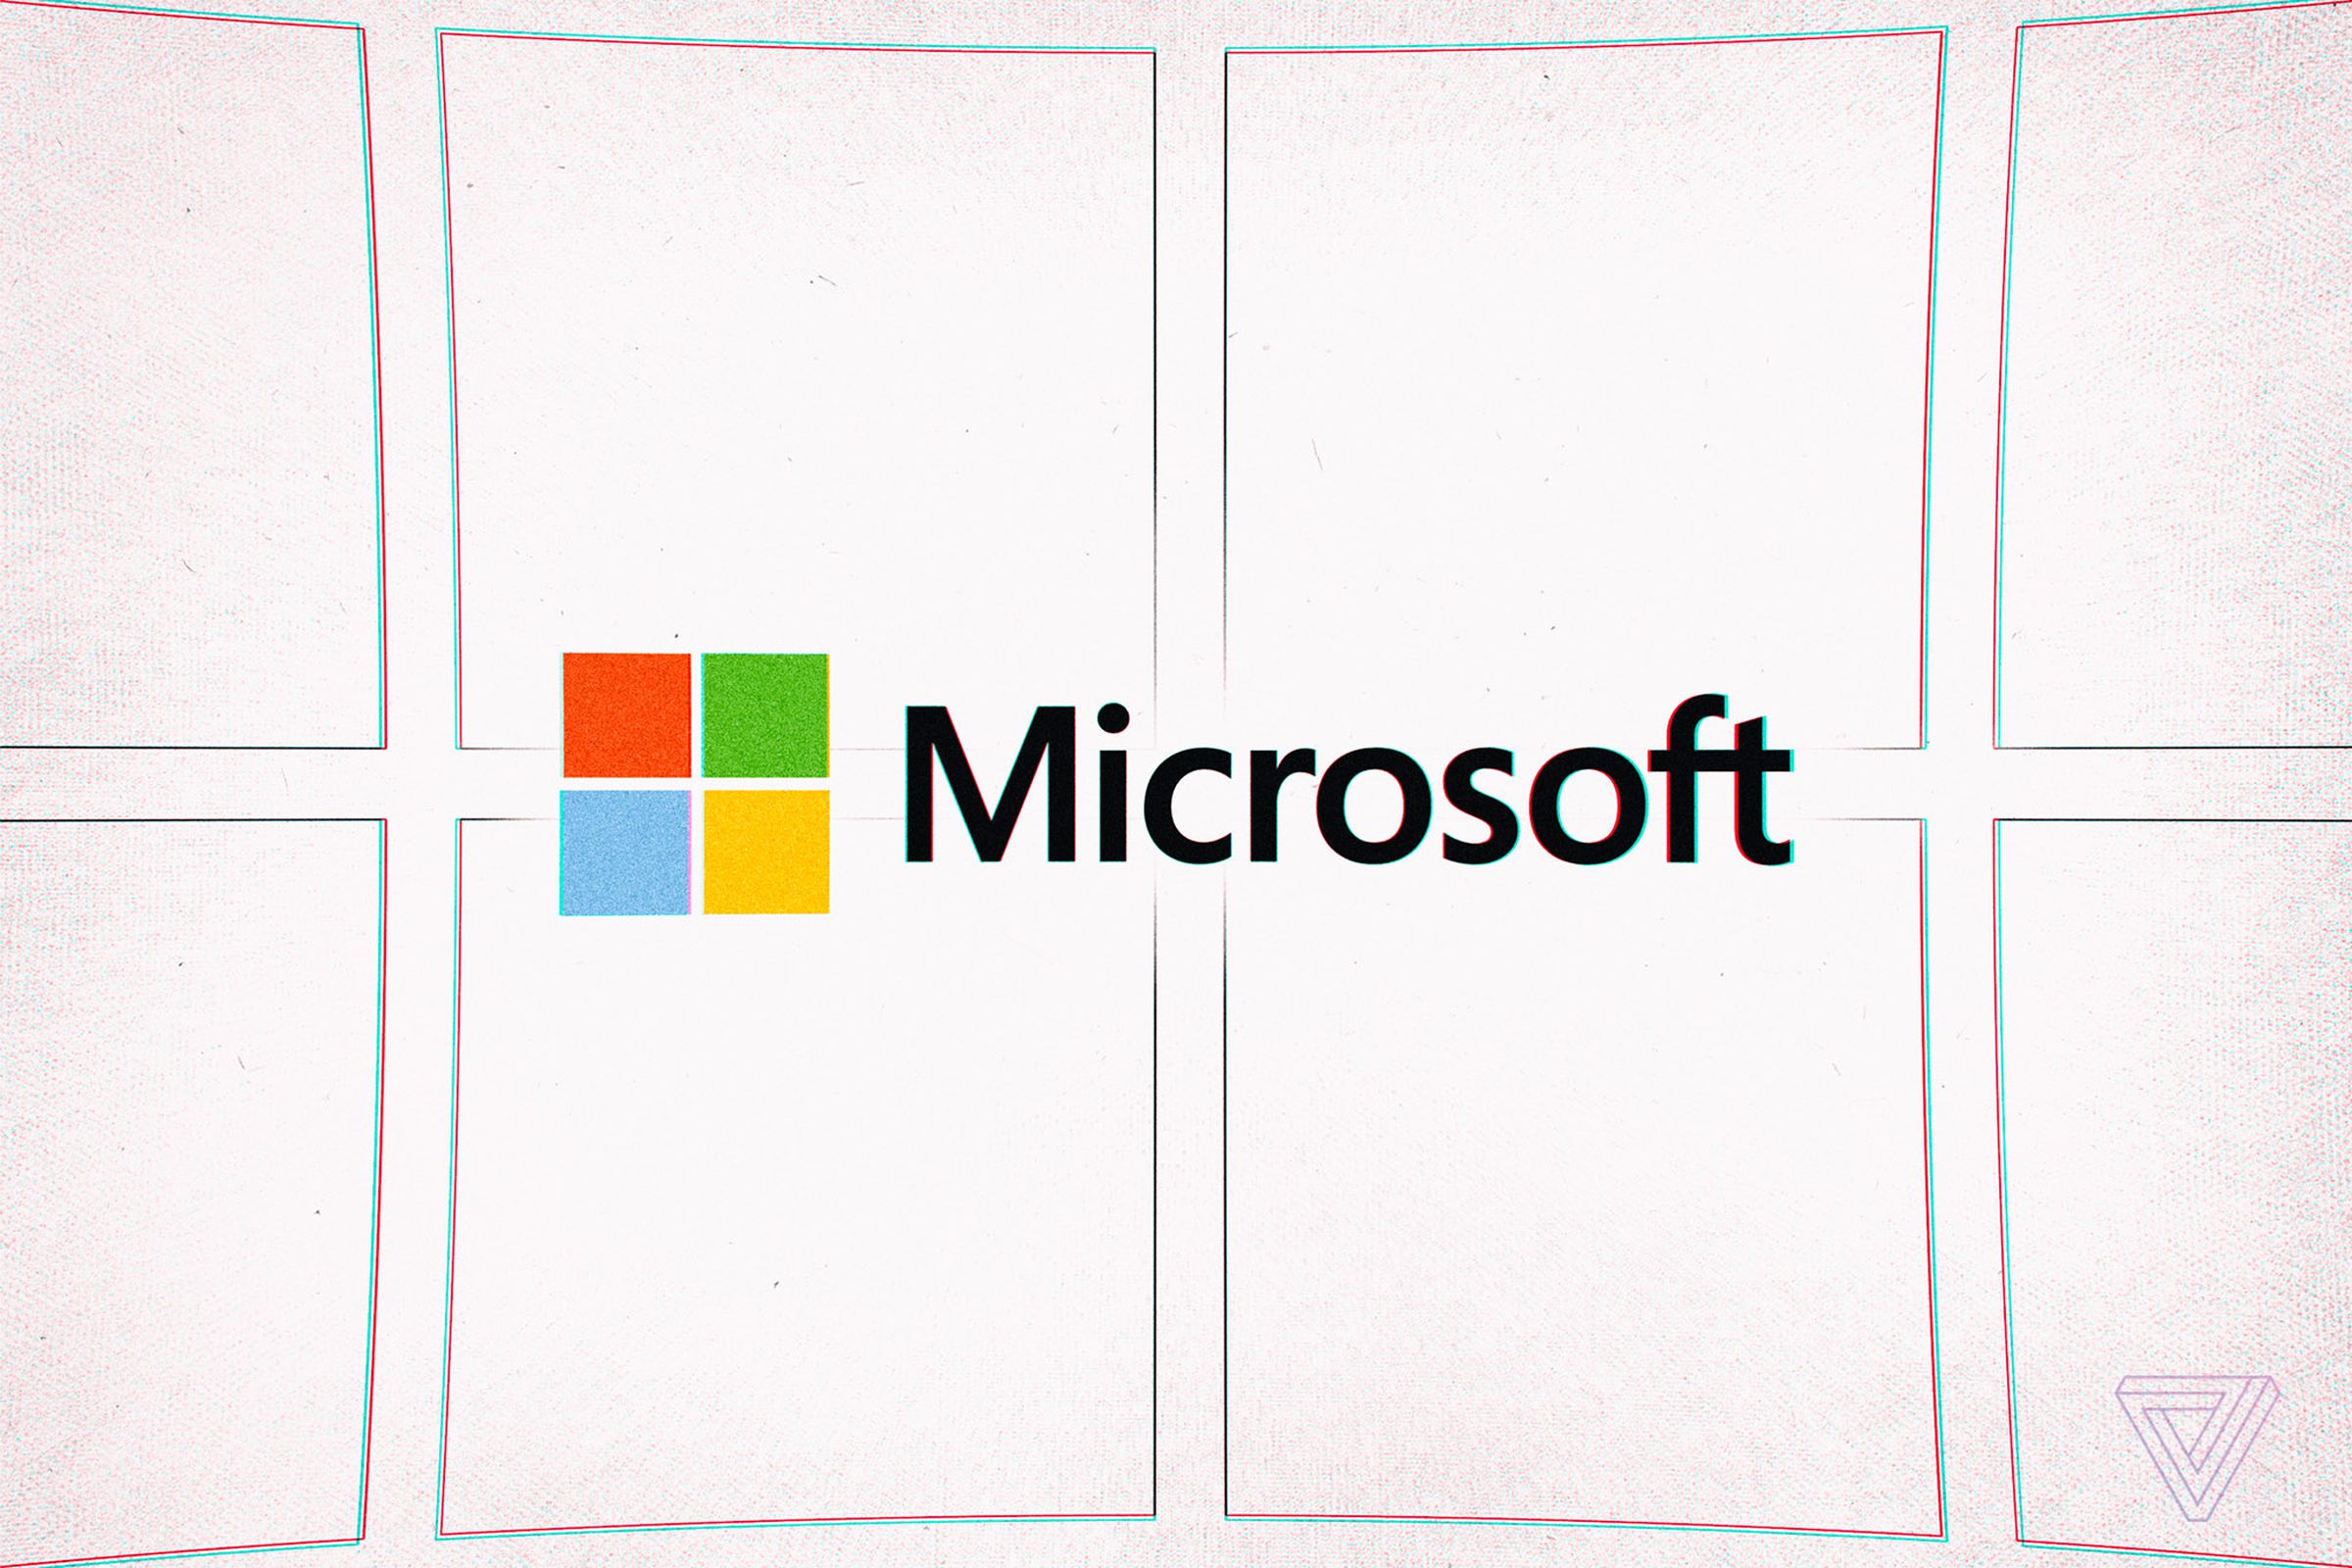 A stock image of the Microsoft logo.